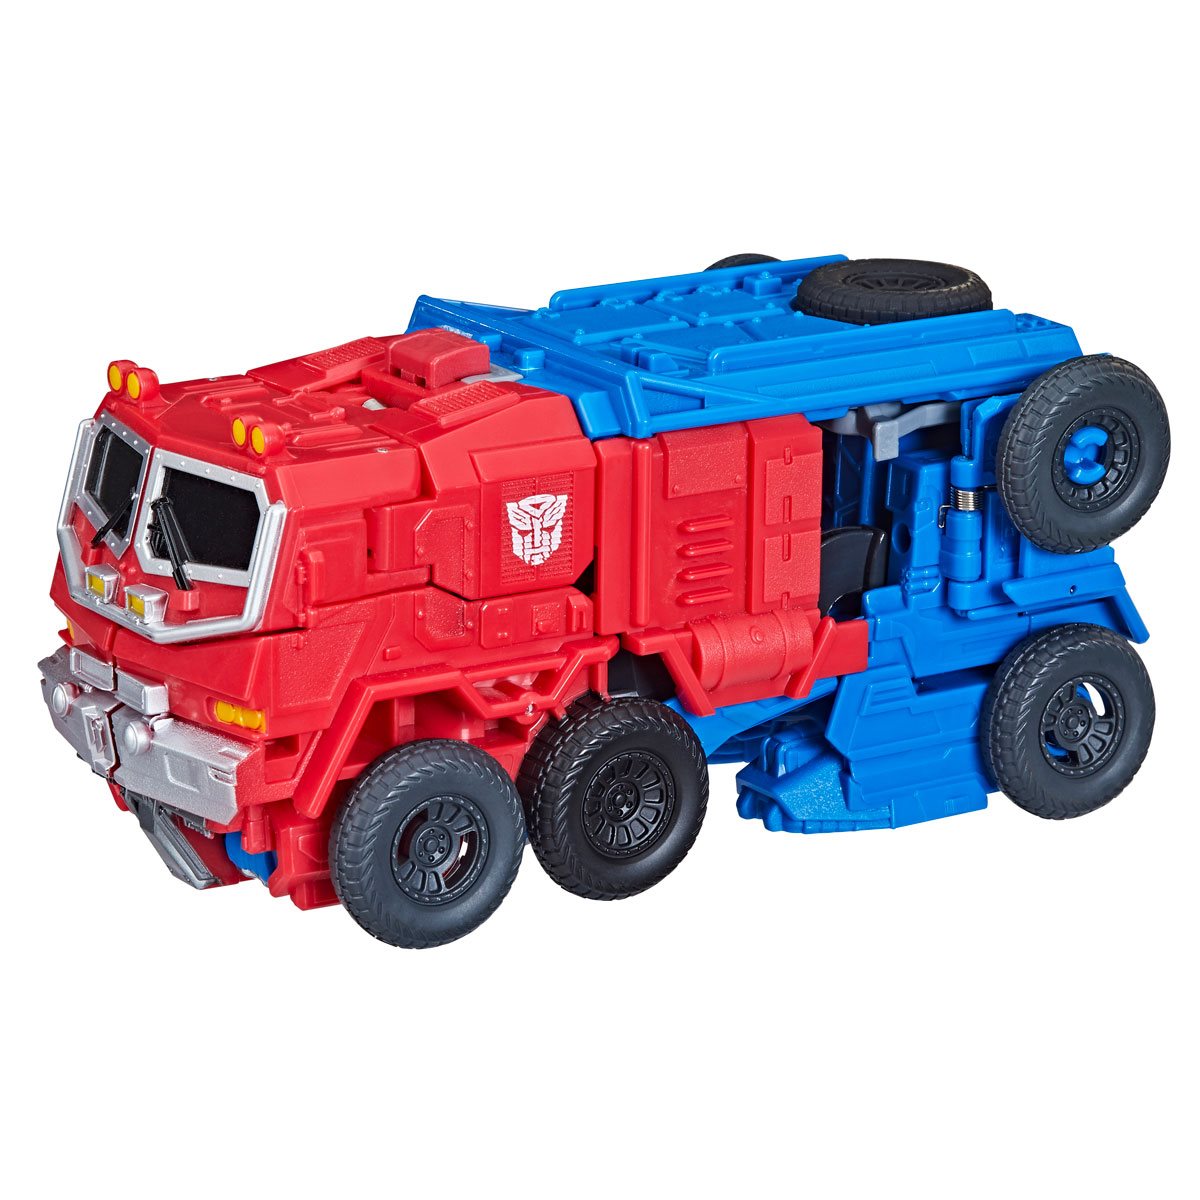 Transformers Rise of The Beasts - Smash Changer Optimus Prime Action Figure Toy truck mode